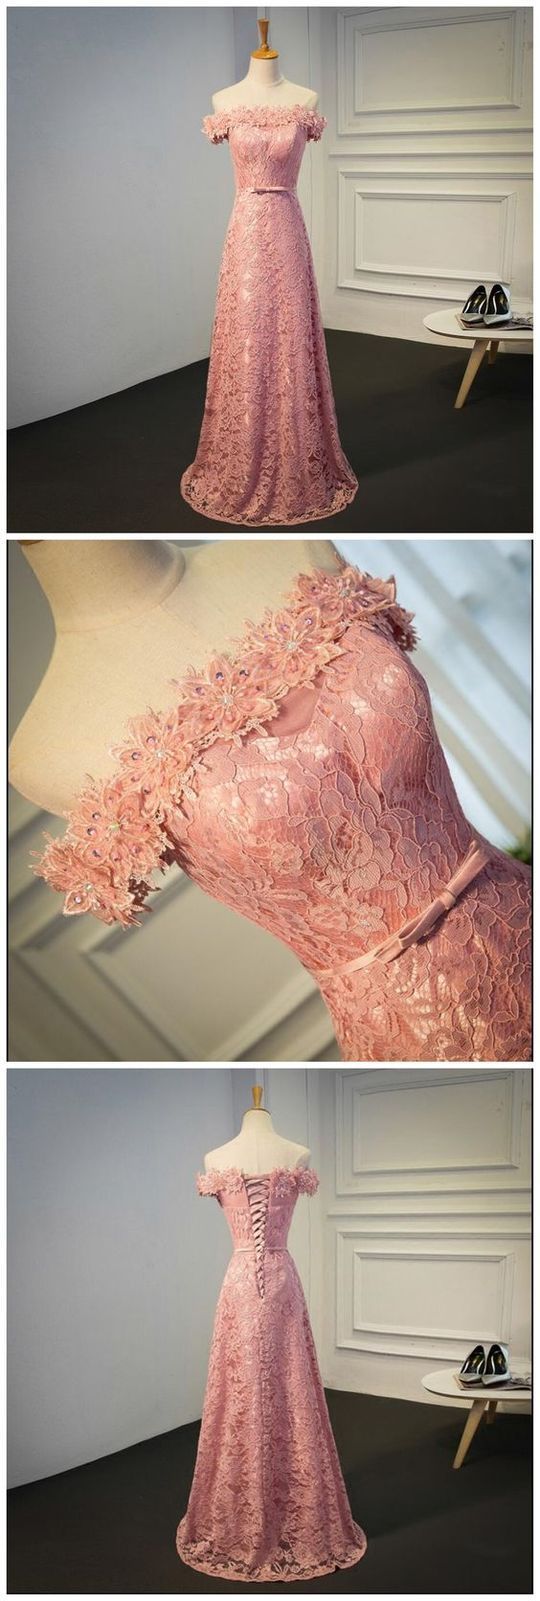 Lovely Pink Lace Off Shoulder Long Prom Dress 2019, Lace Wedding Party Dresses